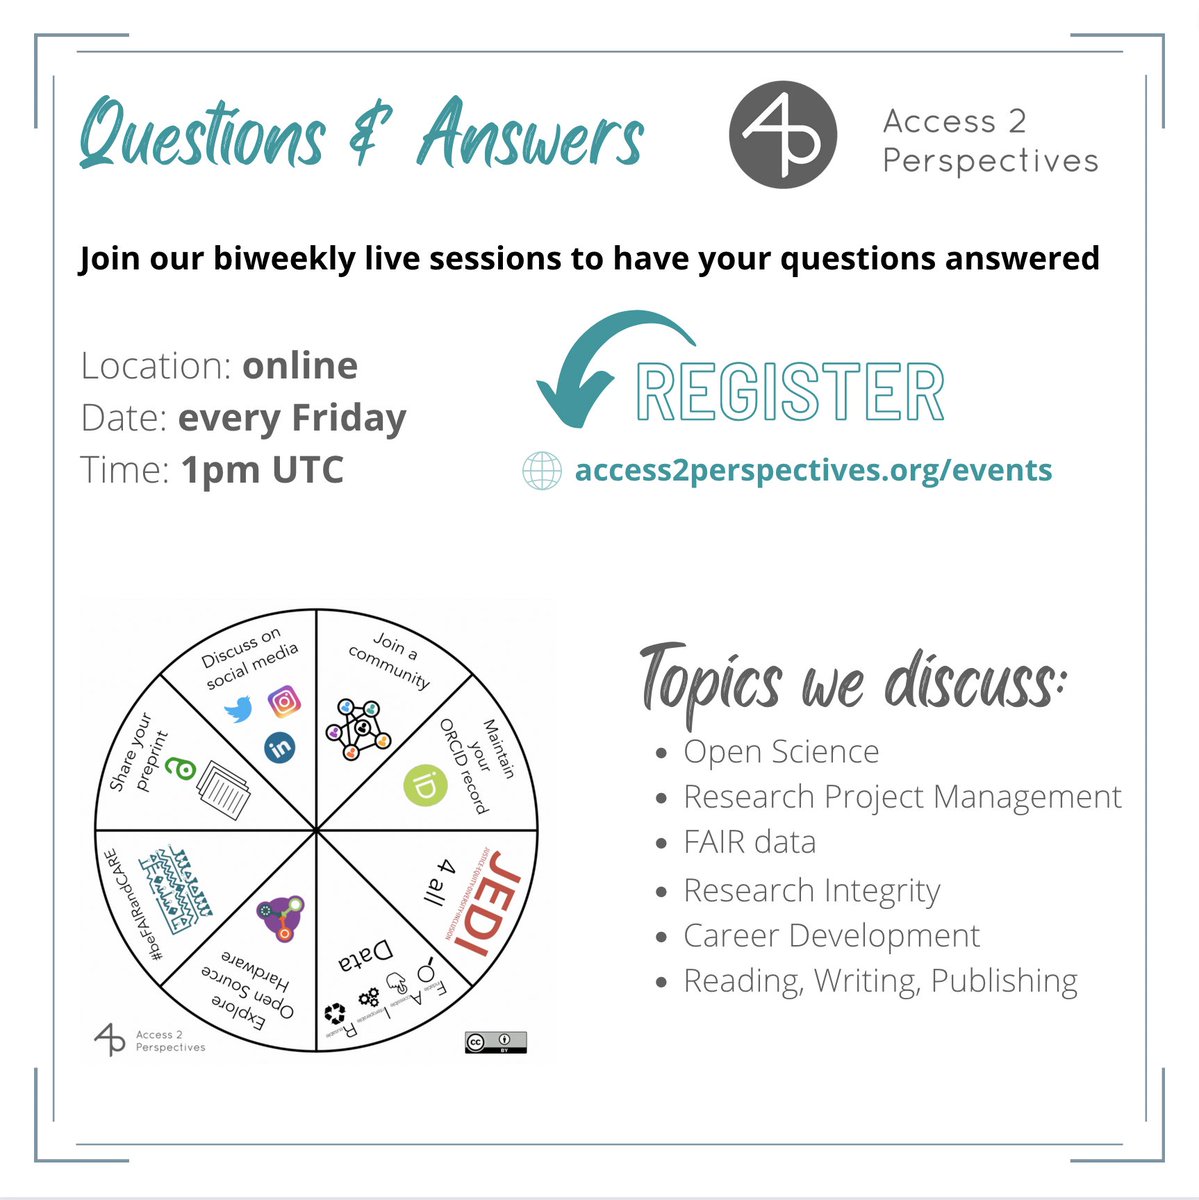 Join us for our community events.
We are looking forward to seeing you! 🙂

Register at forms.gle/LYPRmsj3HhJJUu…

#OpenScience // #OpenAccess // #PhDchat #PhDcareer // #researchdata // #GlobalResearchEquity